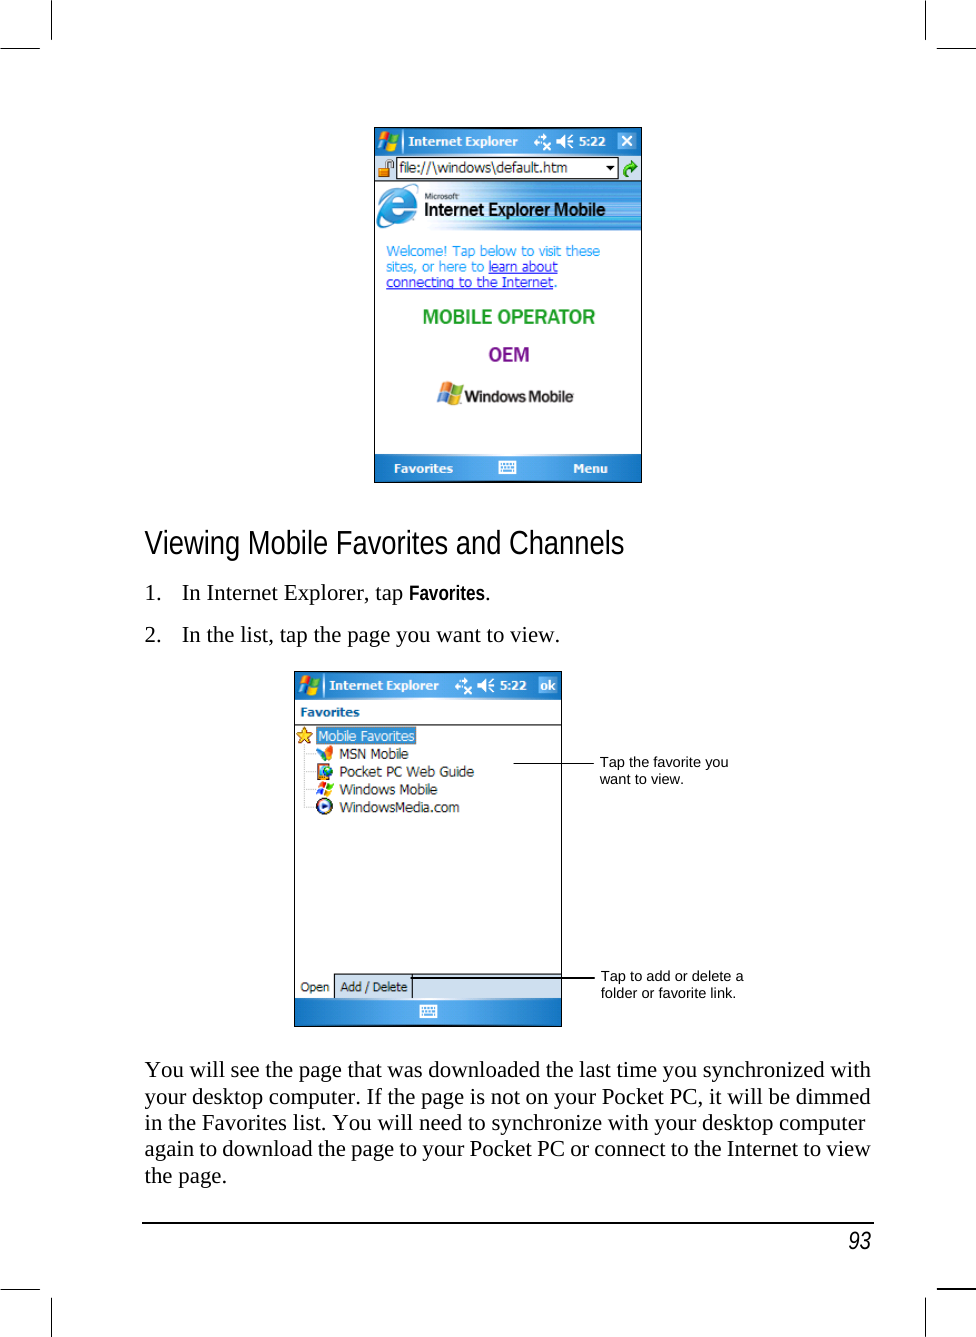   93  Viewing Mobile Favorites and Channels 1.  In Internet Explorer, tap Favorites.  2.  In the list, tap the page you want to view.    You will see the page that was downloaded the last time you synchronized with your desktop computer. If the page is not on your Pocket PC, it will be dimmed in the Favorites list. You will need to synchronize with your desktop computer again to download the page to your Pocket PC or connect to the Internet to view the page. Tap the favorite you want to view. Tap to add or delete a folder or favorite link.